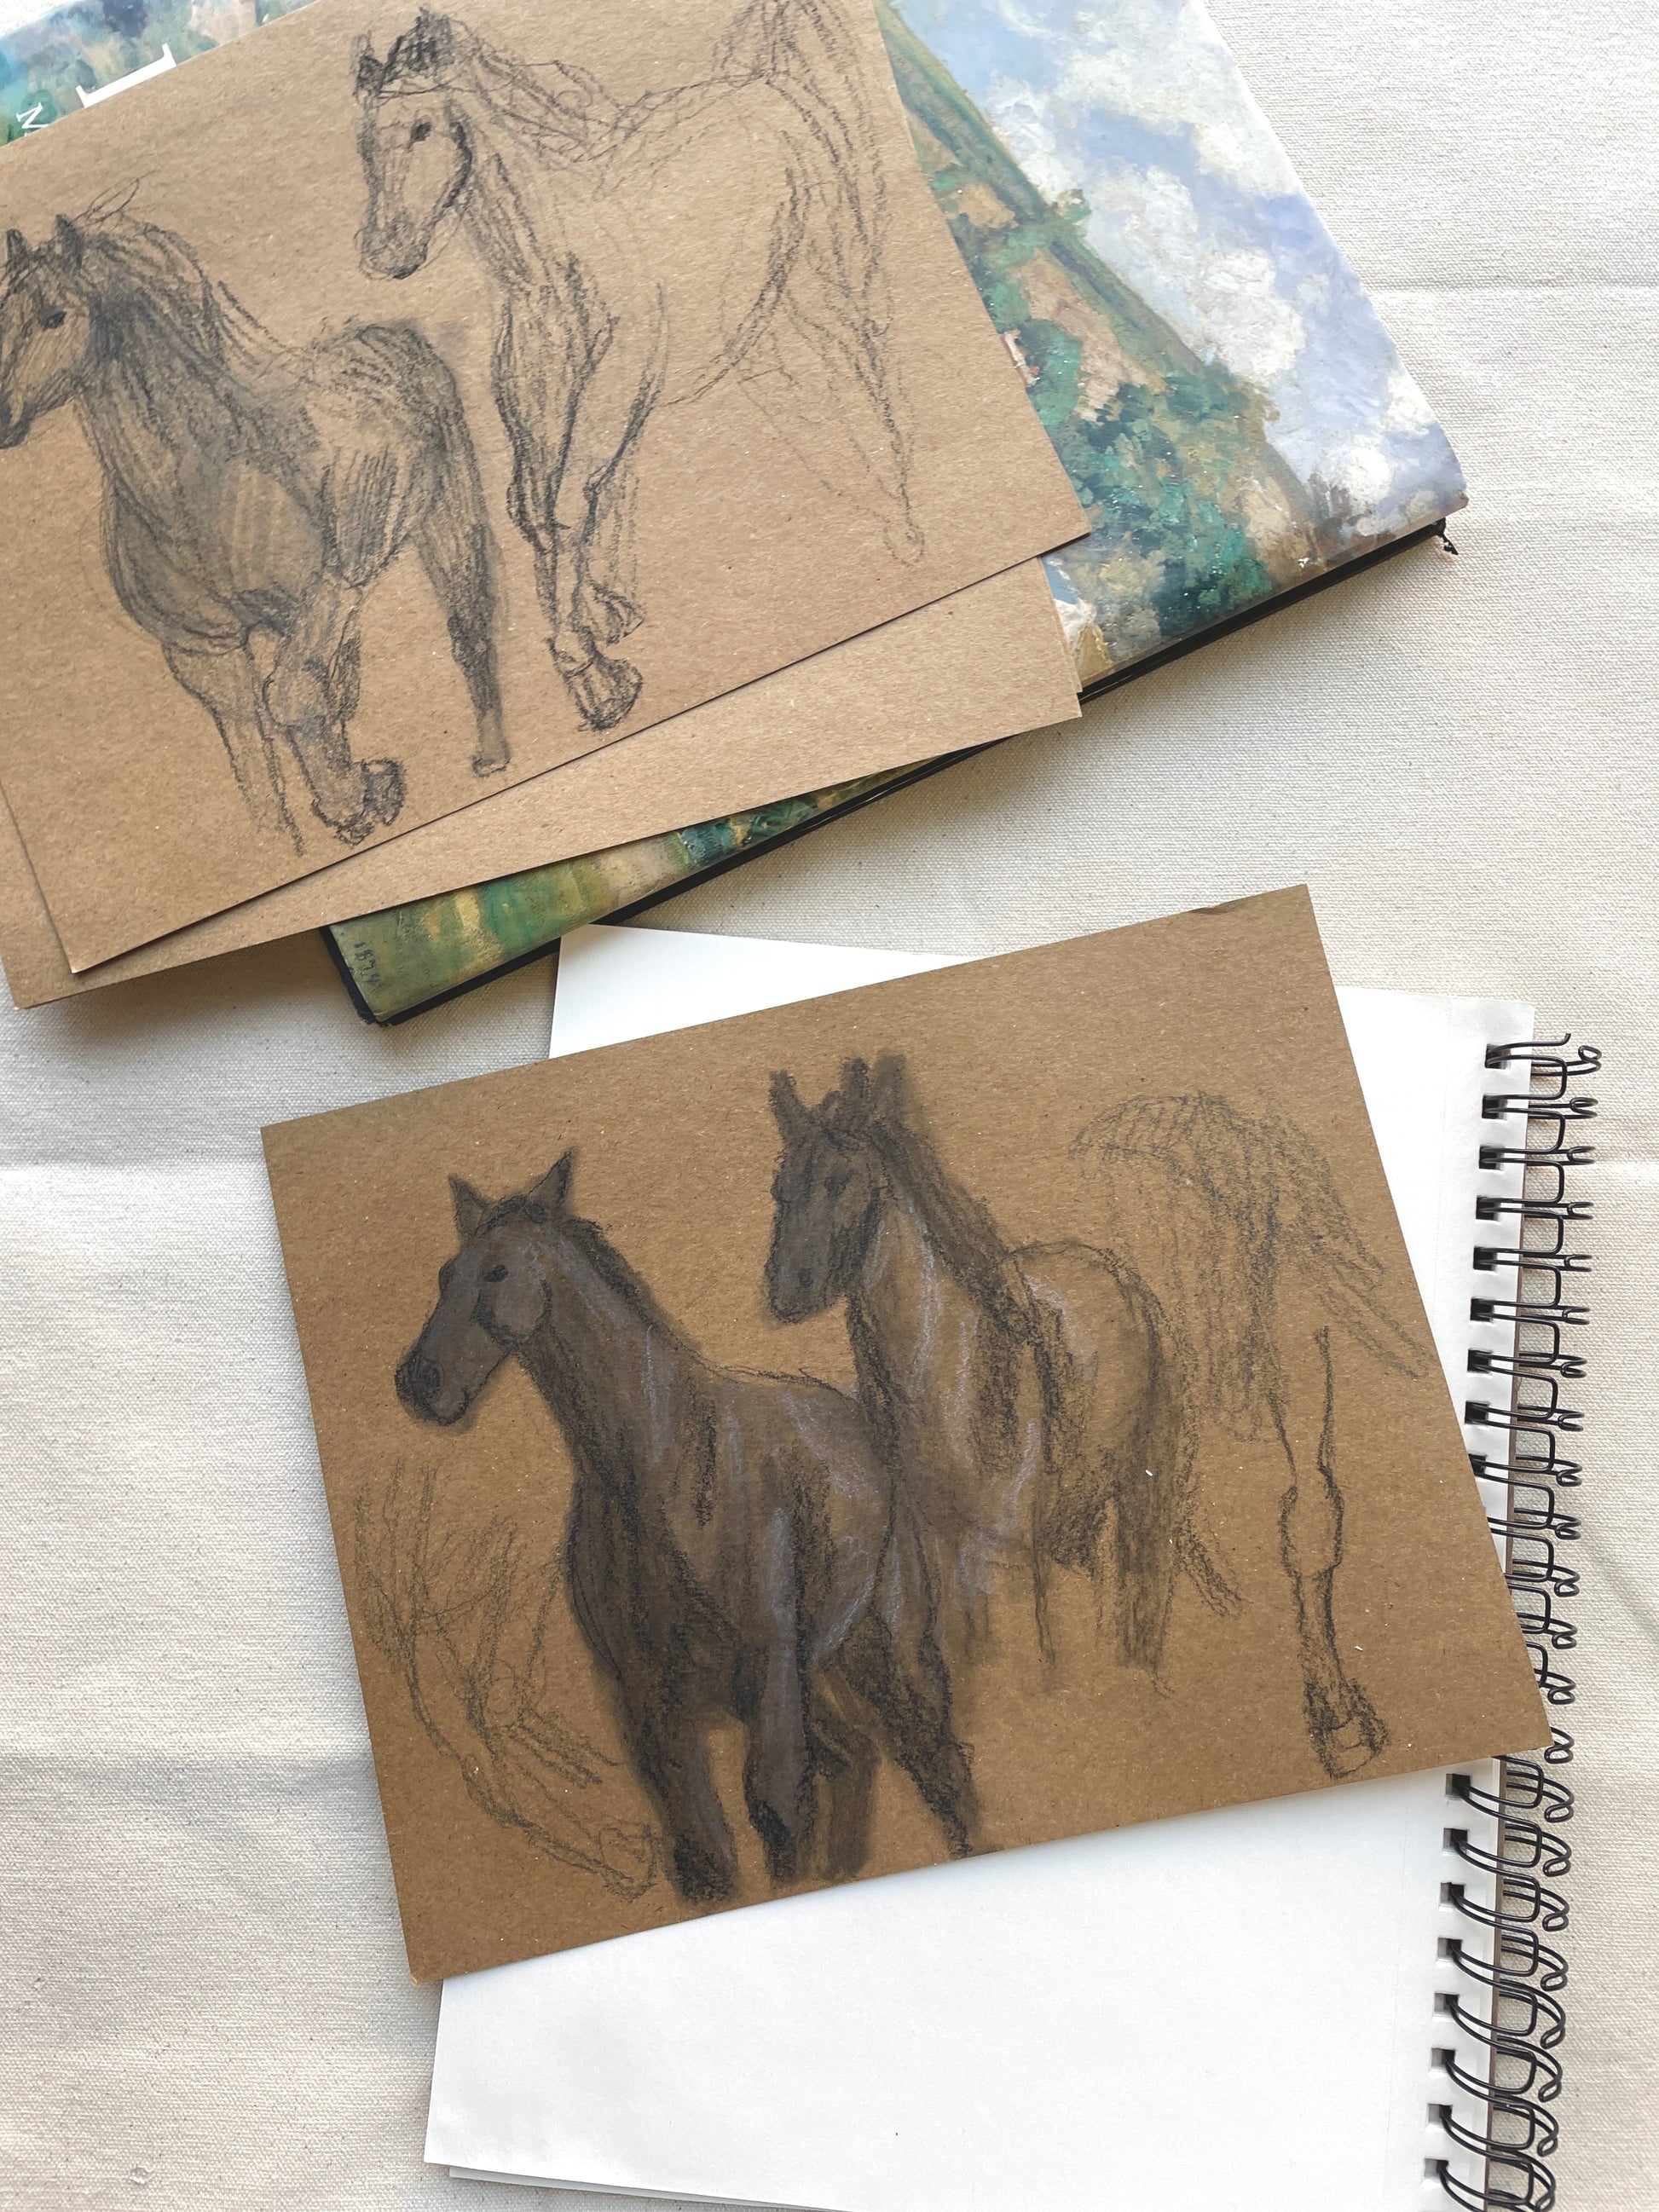 Charcoal Horses on Craft Paper